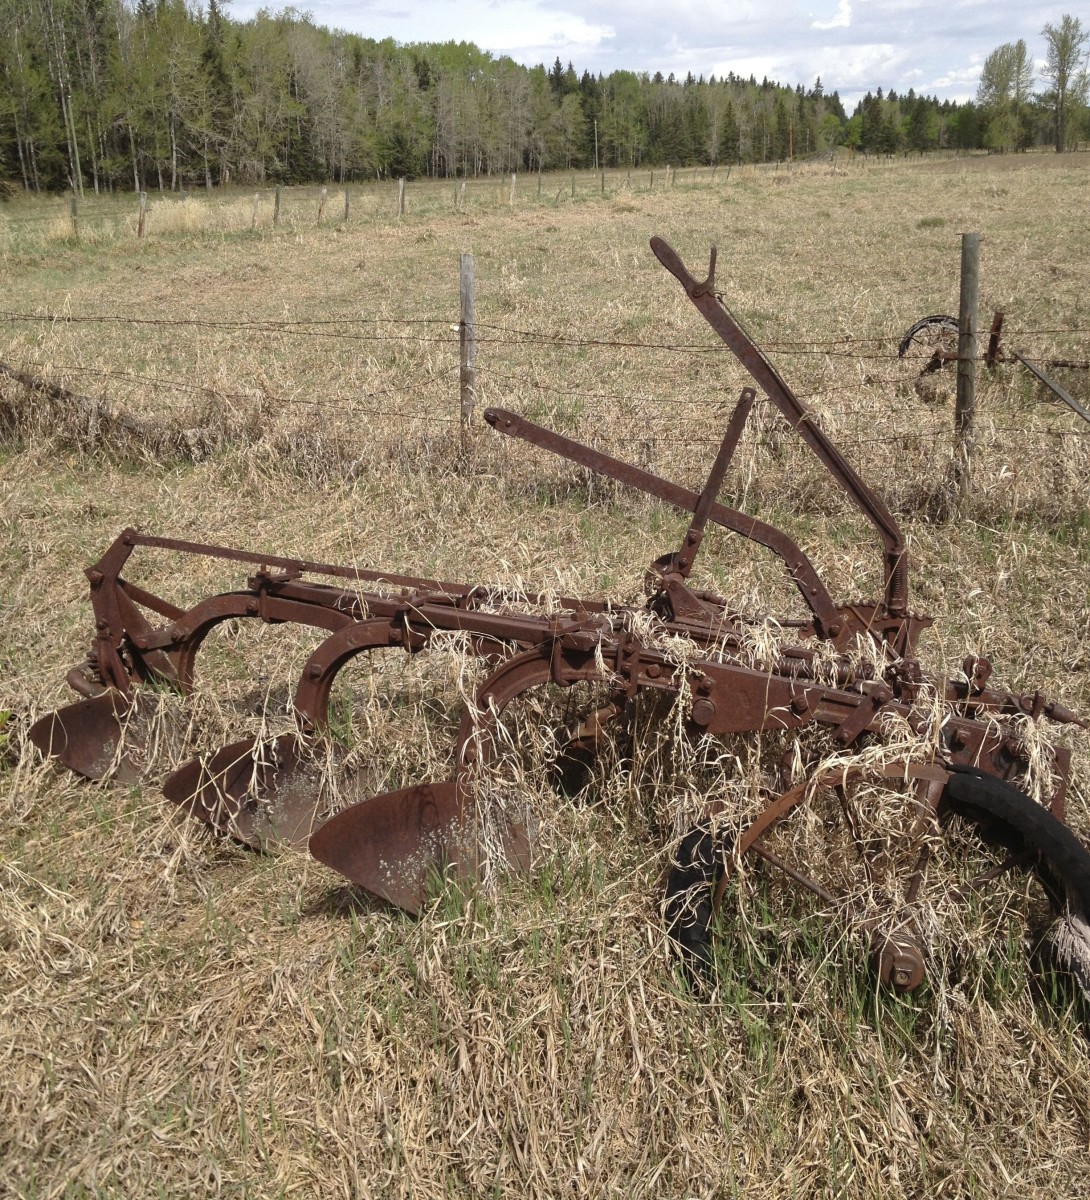 The Rusted Plow